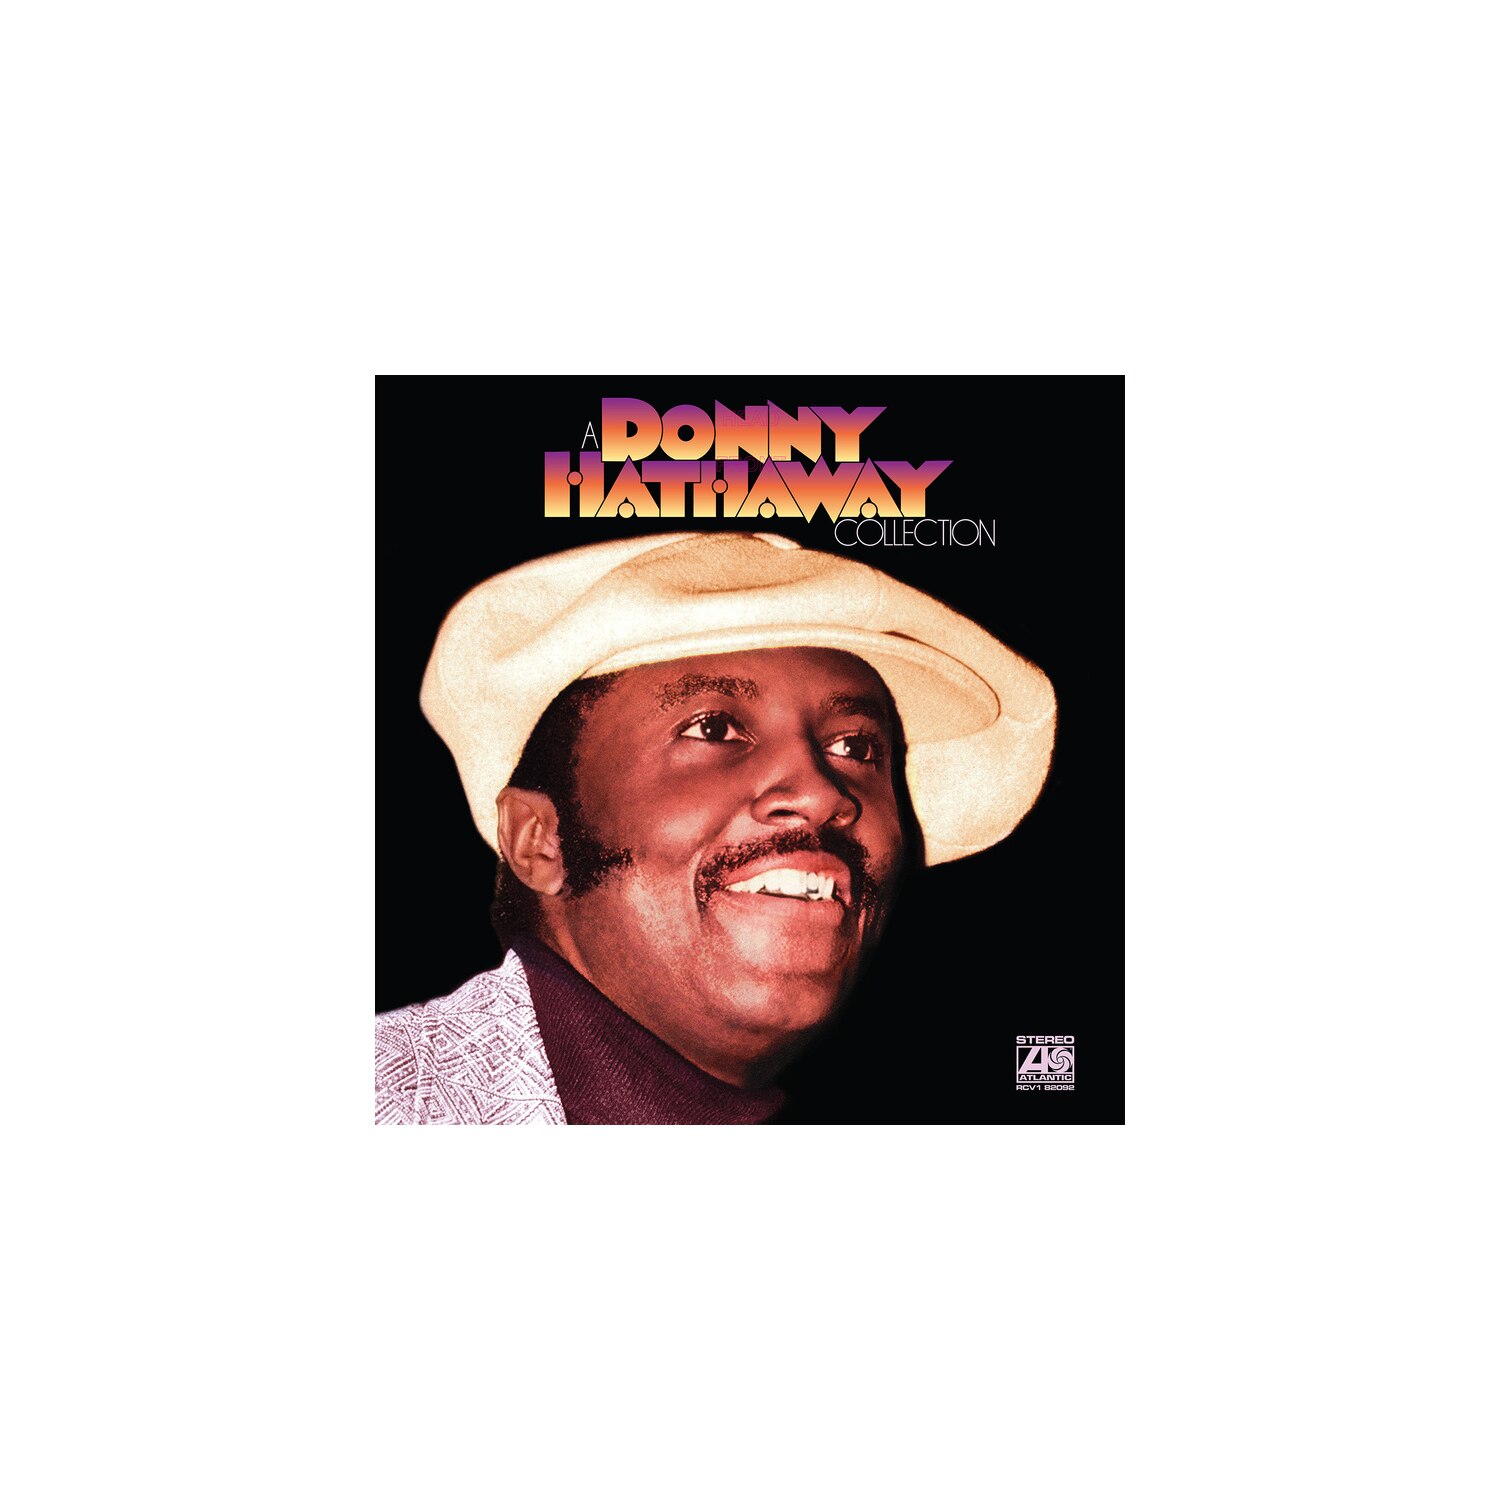 DONNY HATHAWAY COLLECTION -- HATHAWAY DONNY